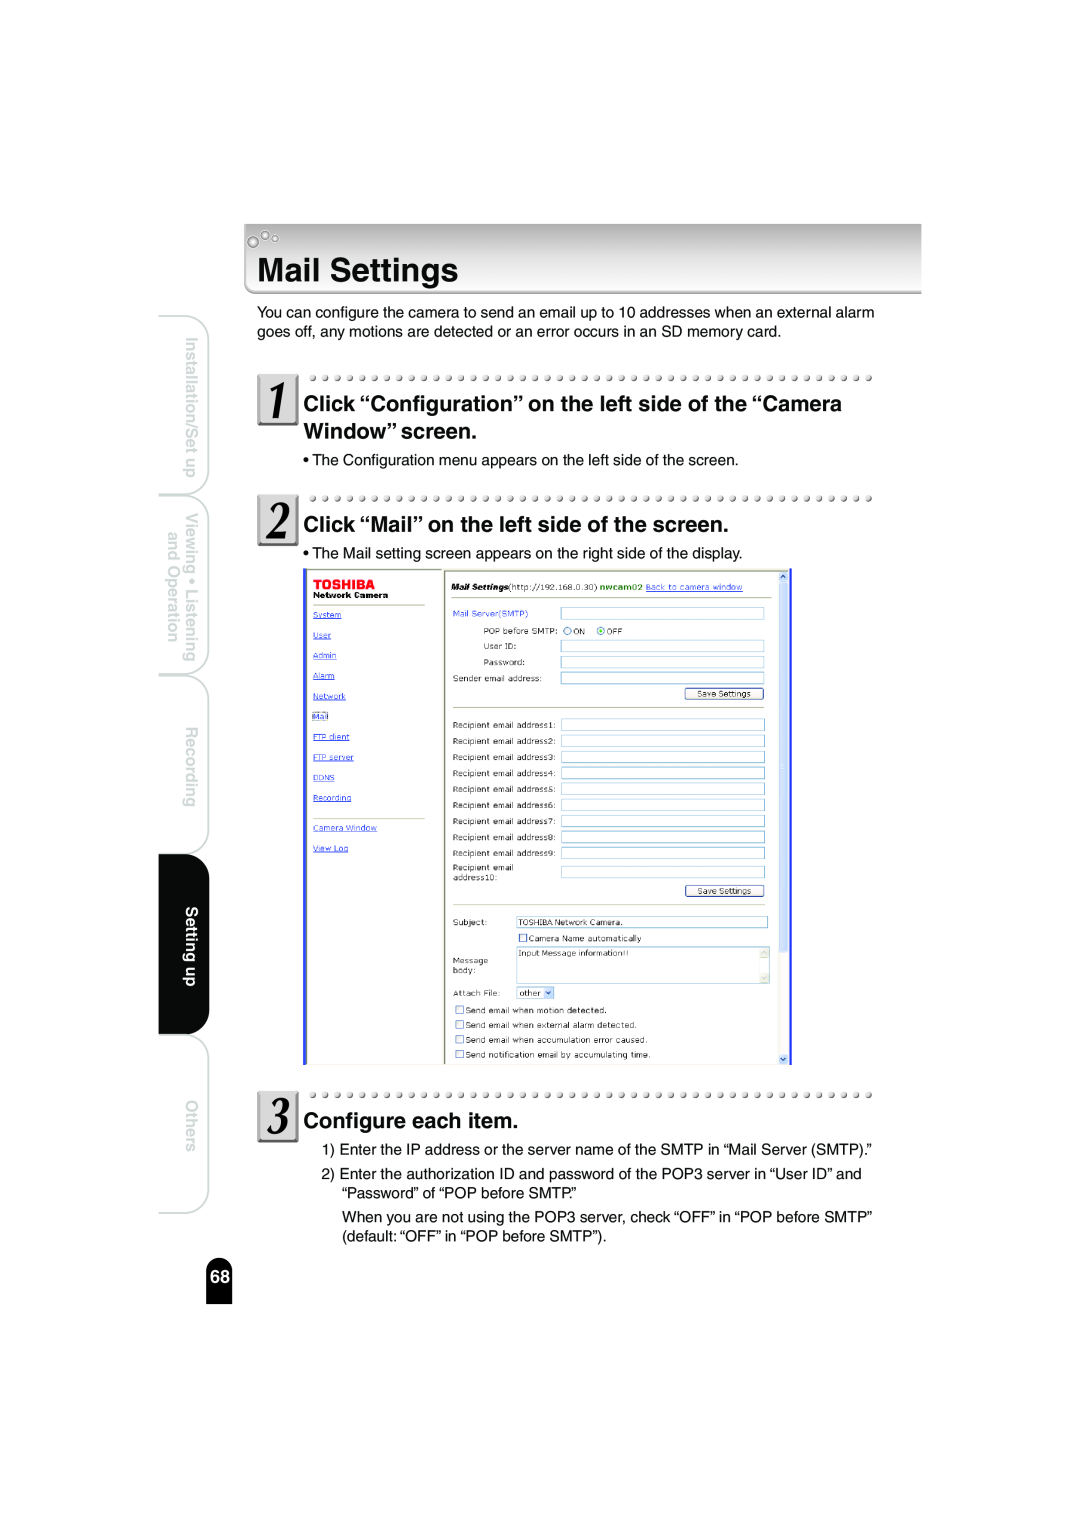 Toshiba IK-WB02A Mail Settings, Click “Mail” on the left side of the screen, Configure each item, Installation/Set up 